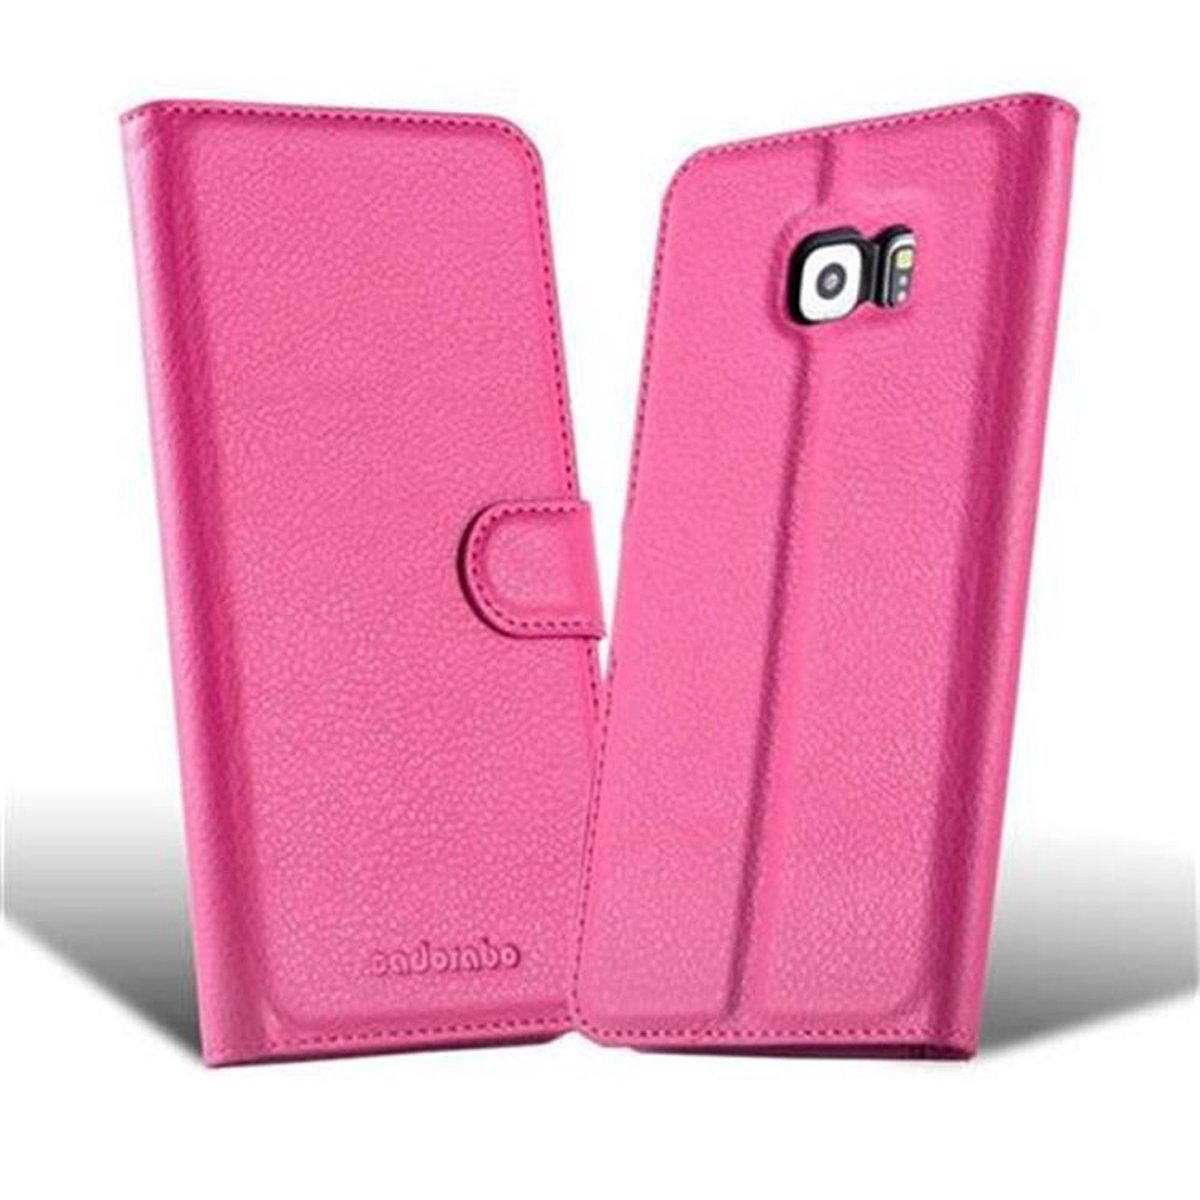 Book CADORABO CHERRY PINK Hülle Standfunktion, Samsung, Galaxy EDGE, S6 Bookcover,